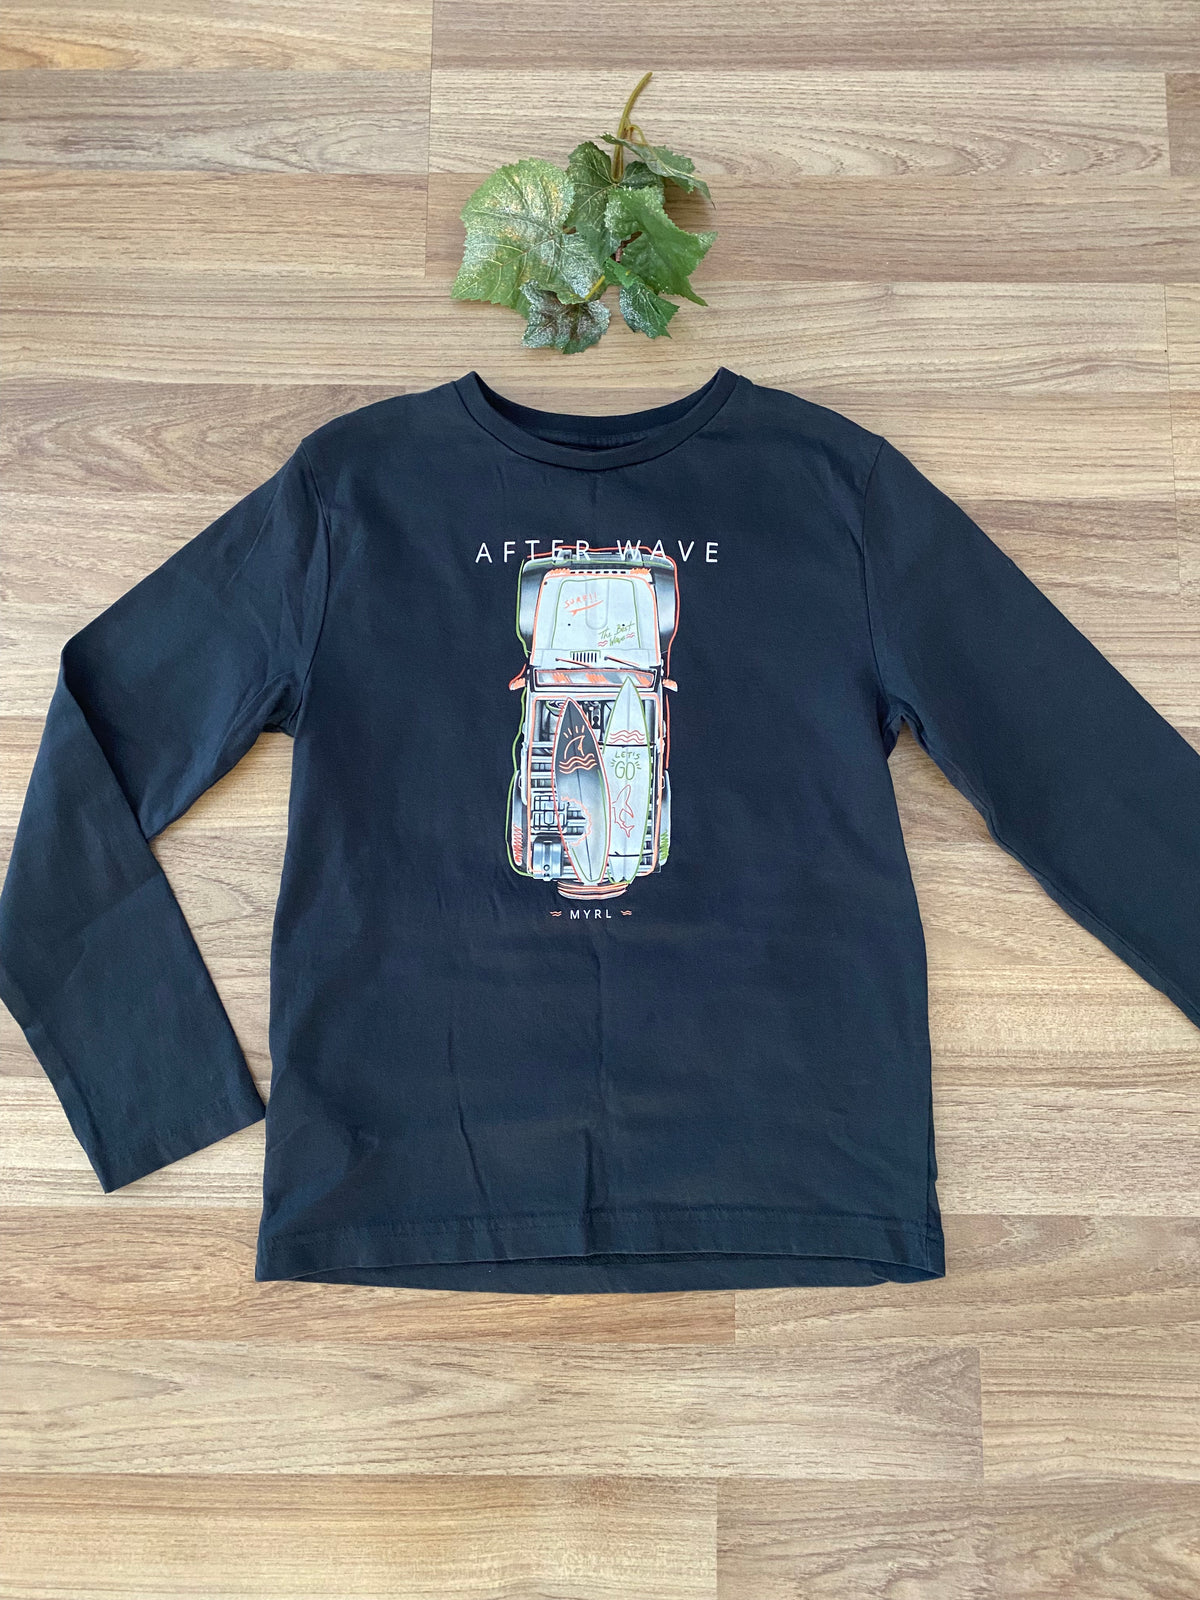 Long Sleeve Graphic Top (Boys Size 8)